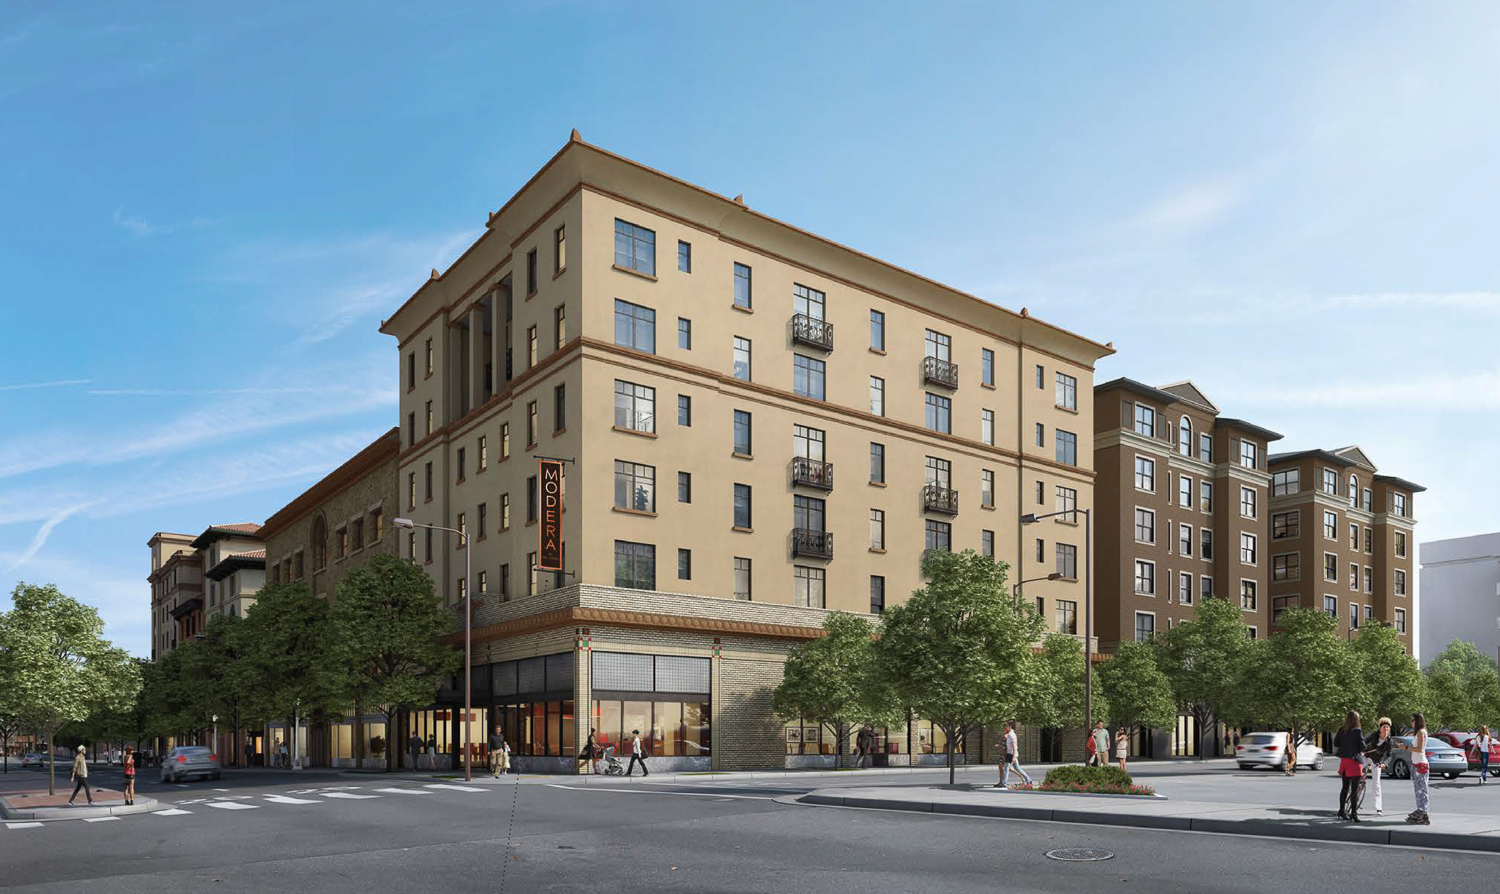 The Ace Building with the Walnut Building to the right, within the Modera Acheson Commons, rendering by Sky Design